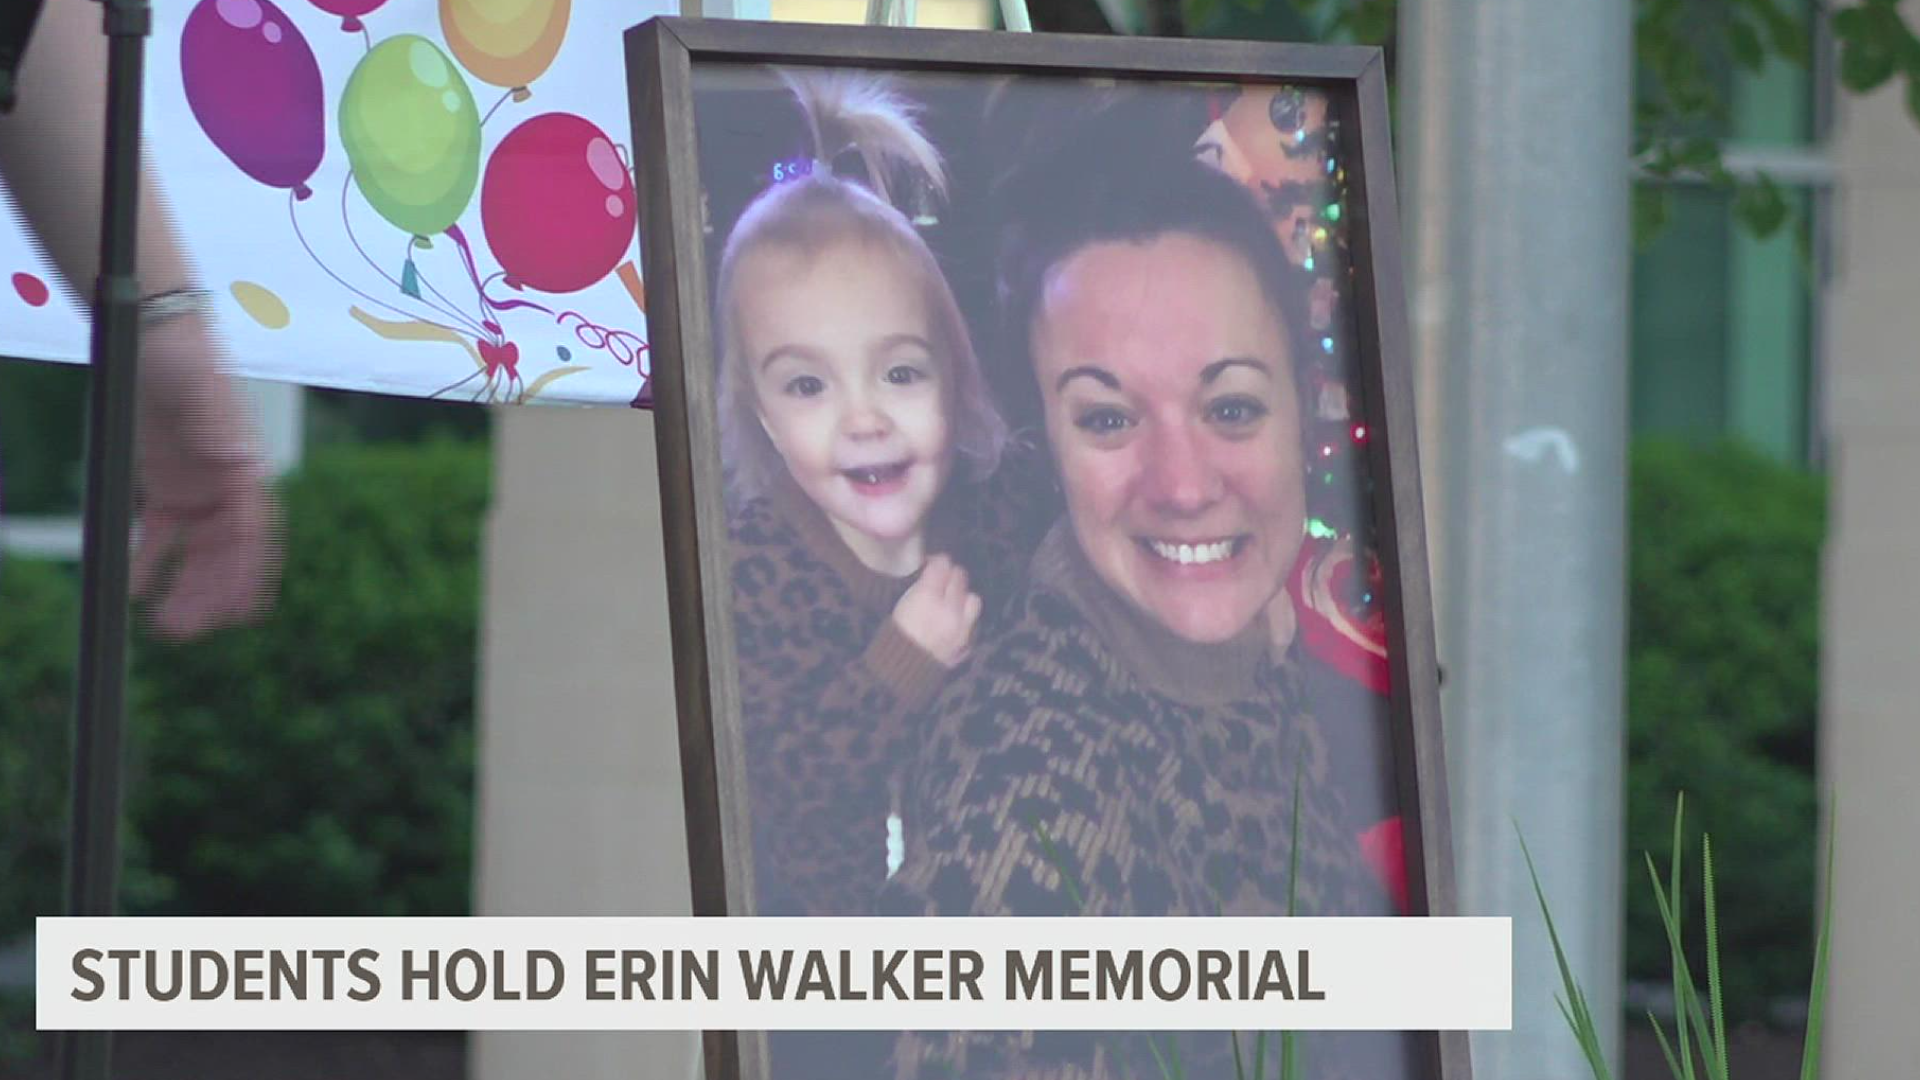 The Central York community came together on May 31 to honor the life of Erin Walker, a high school teacher who was shot and killed over a week ago.